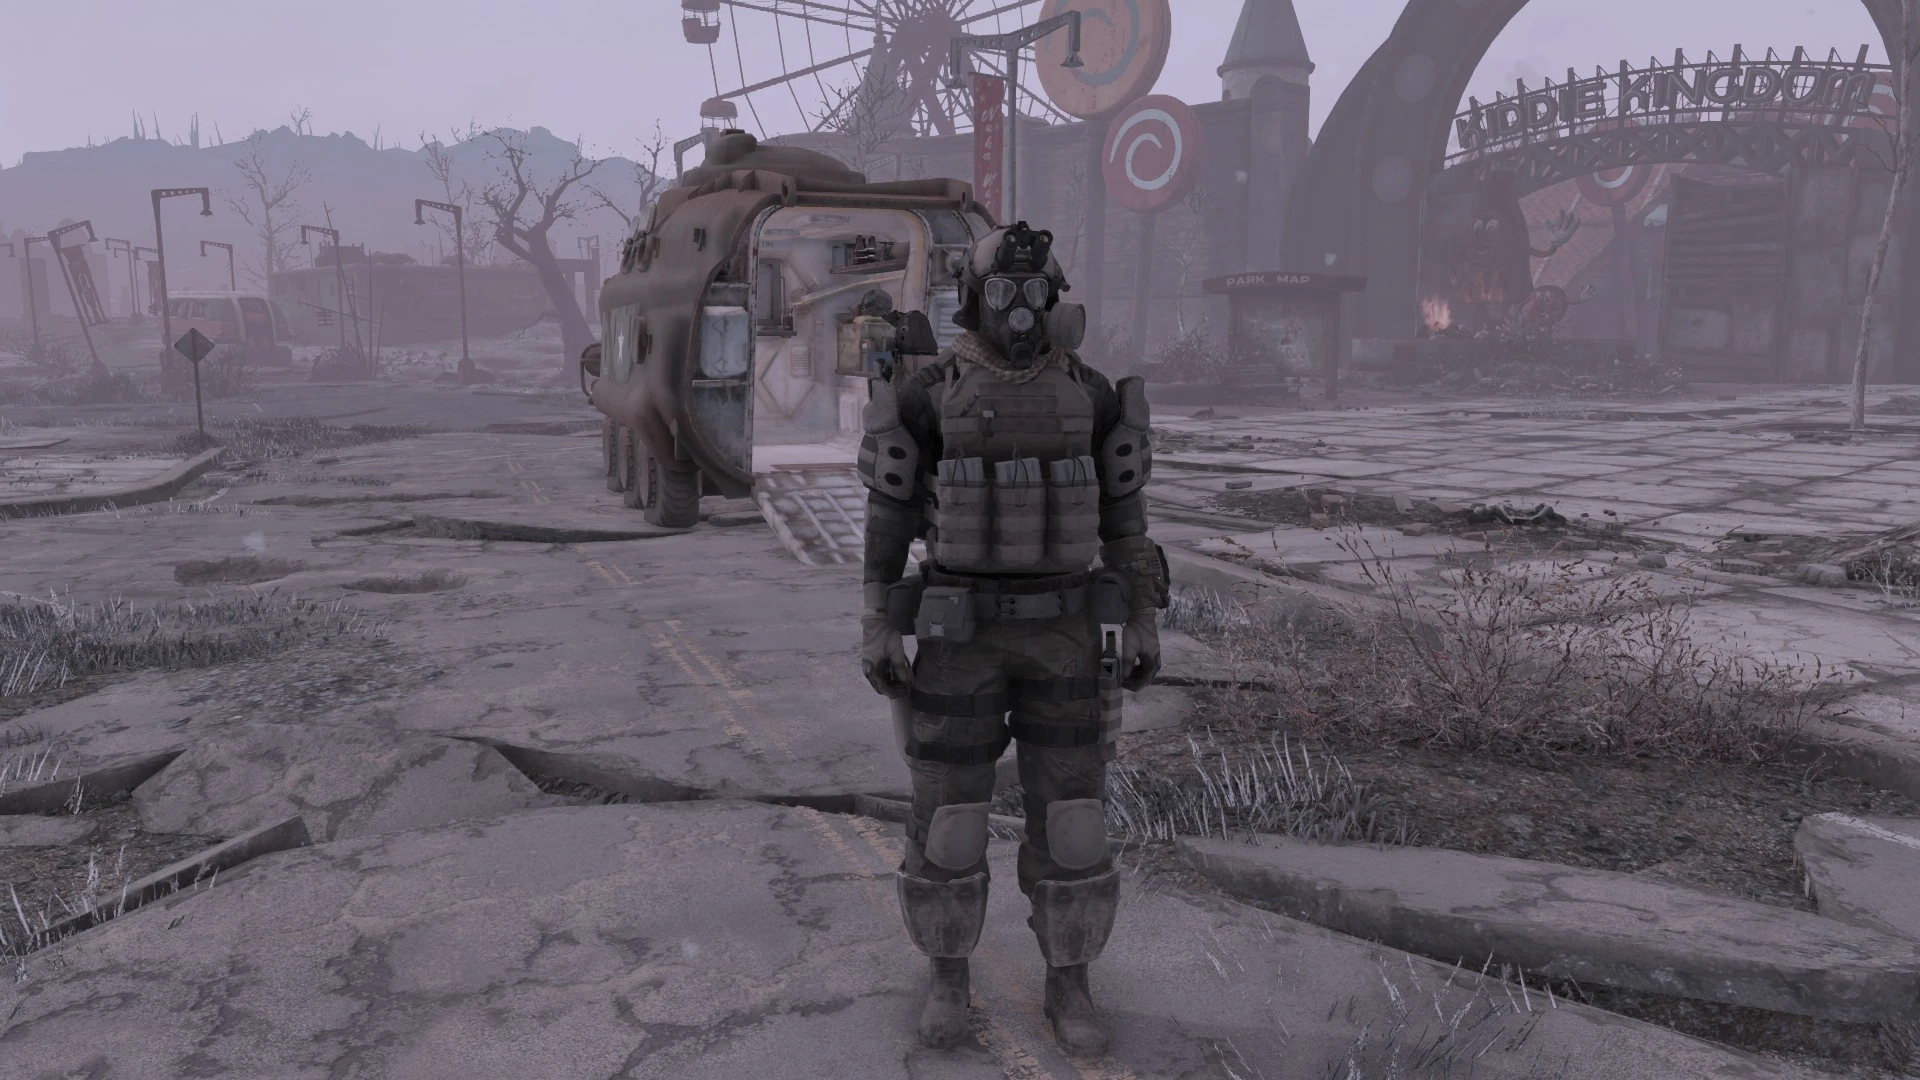 Ar500 Plate Carrier 2 At Fallout 4 Nexus Mods And Community